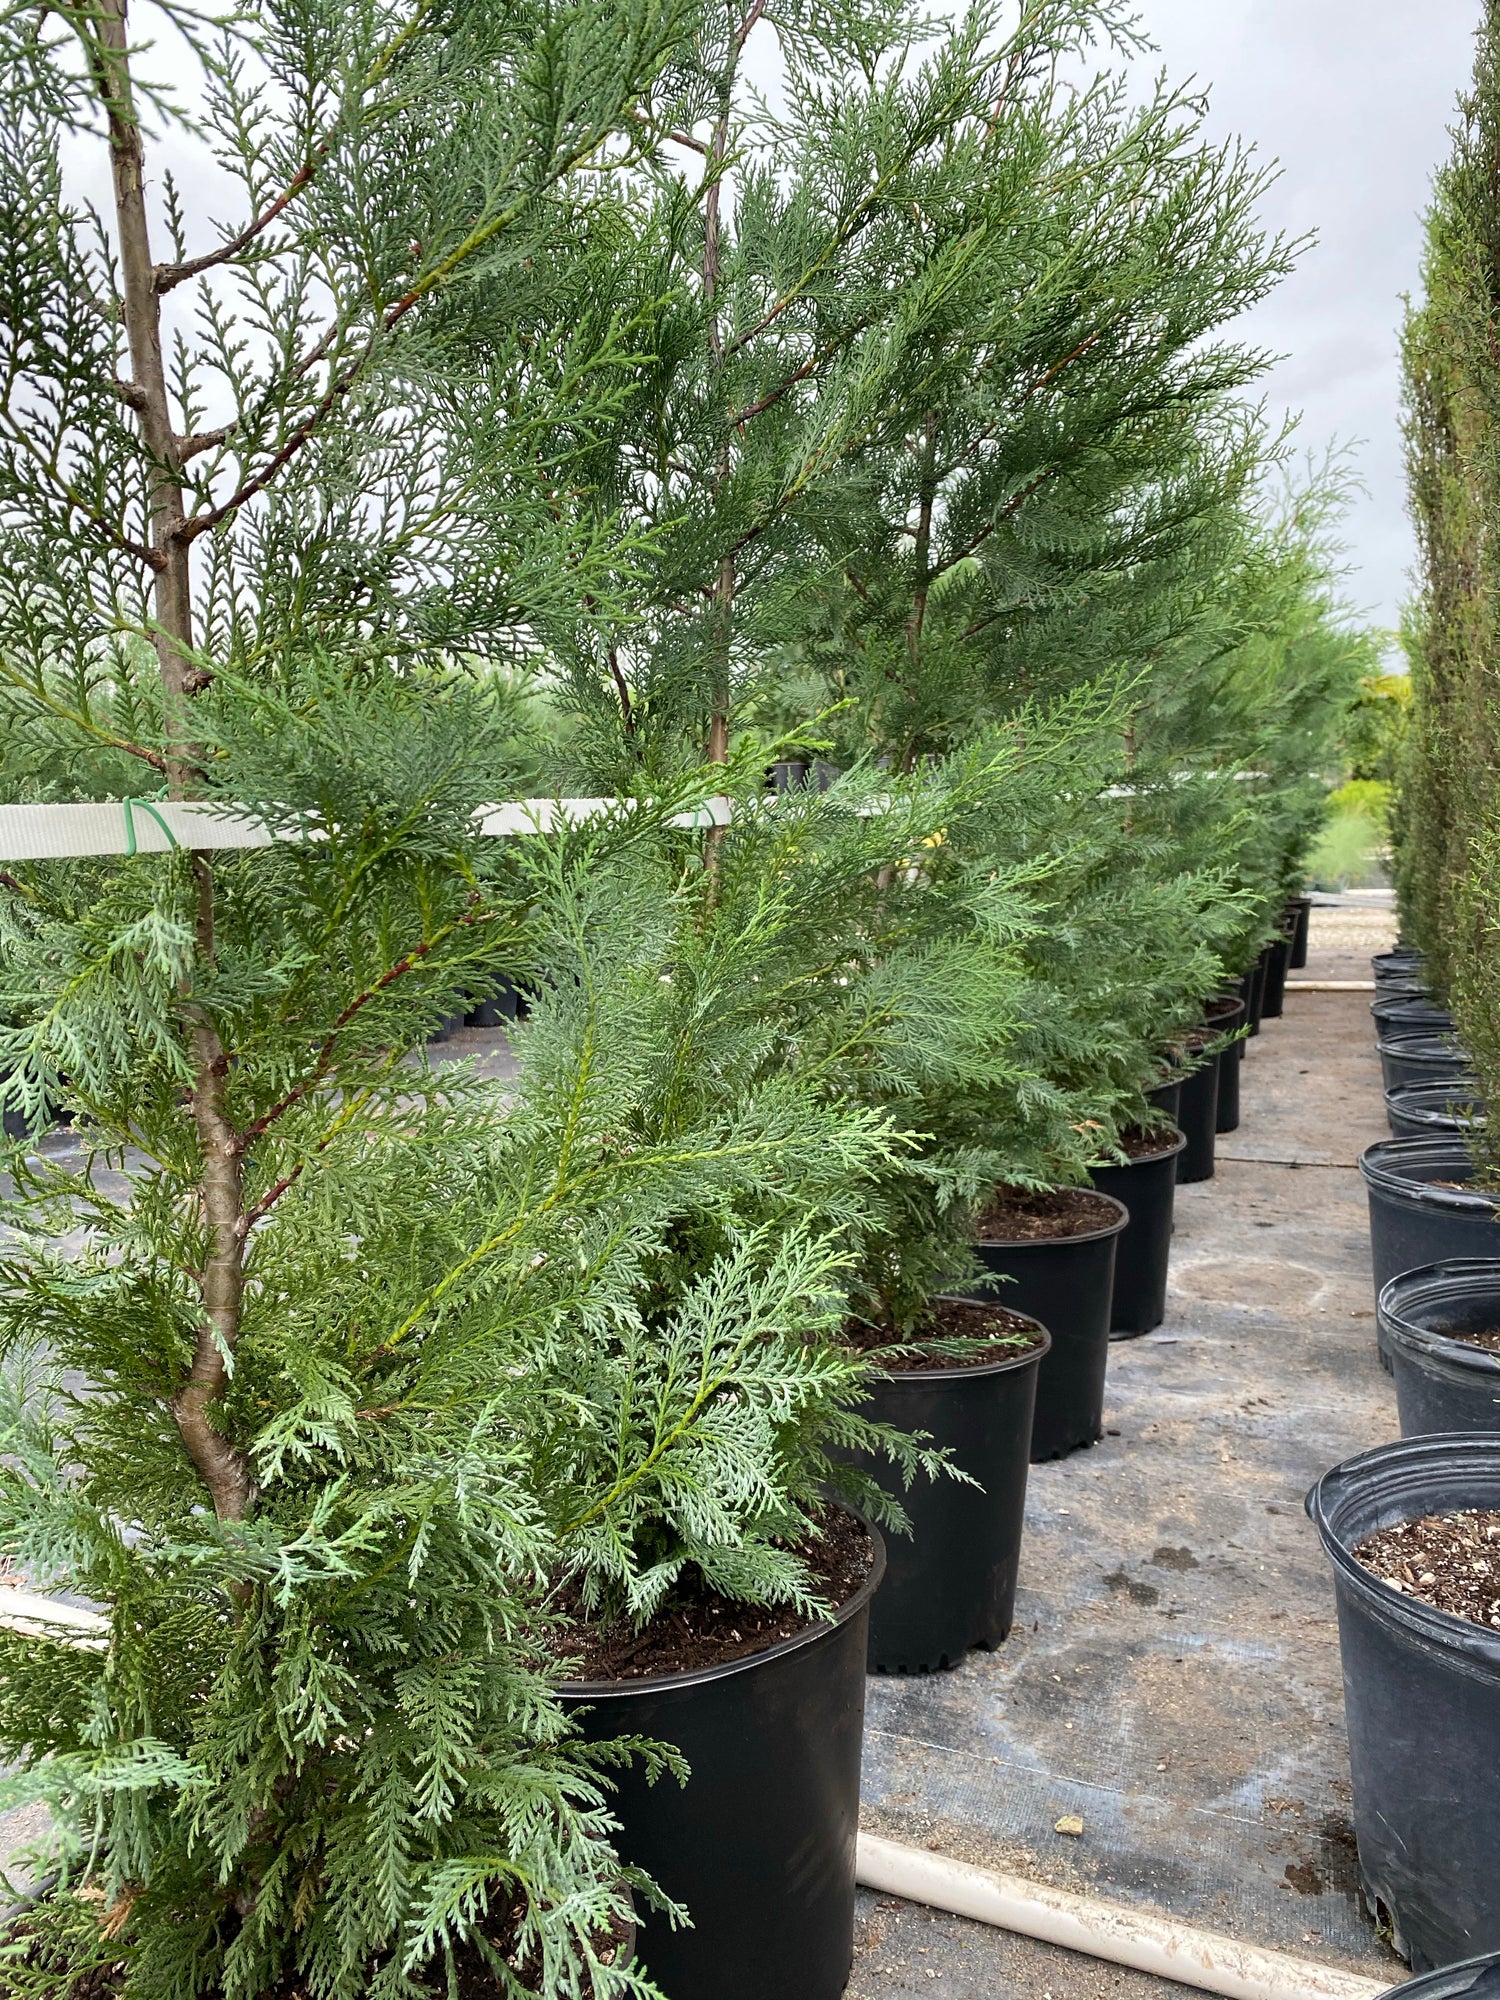 Leyland Cypress Fastest Growing Tree outside view